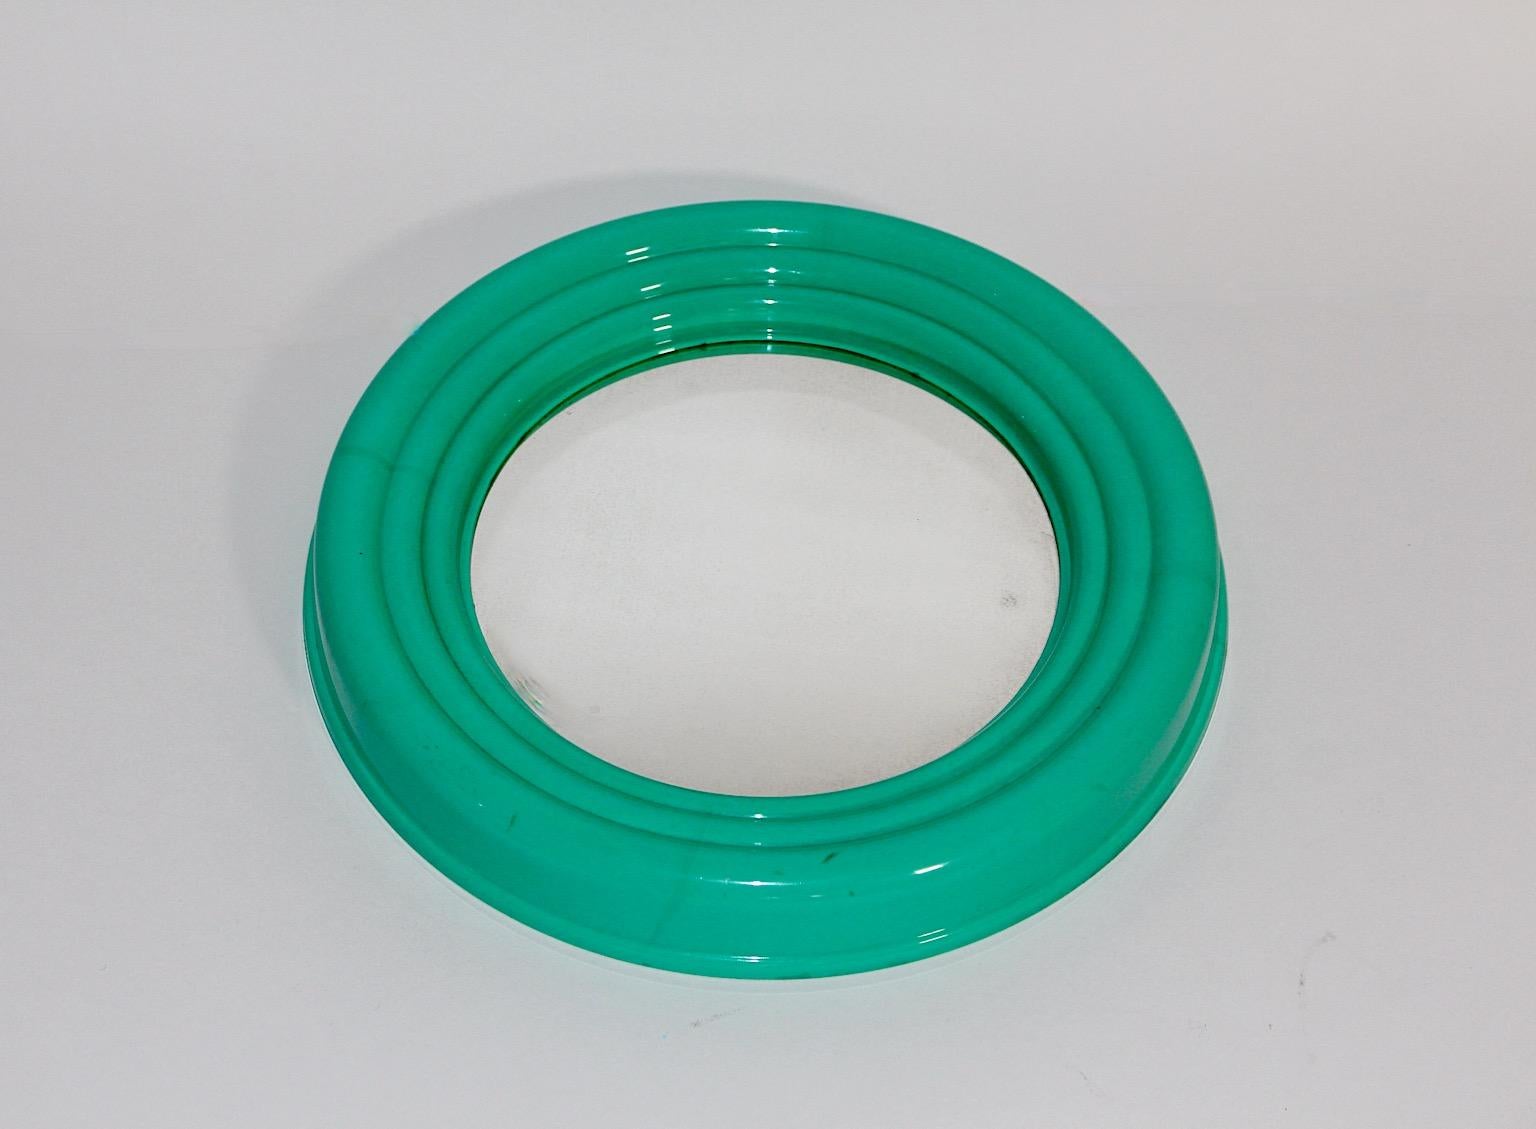 Post-Modern Pop Art style wall mirror circular like from plastic and mirror in bold green teal color 1990s Italy.
A wonderful colorful wall mirror in very good condition with stepped plastic frame and mirror glass.
The wall mirror works perfect as